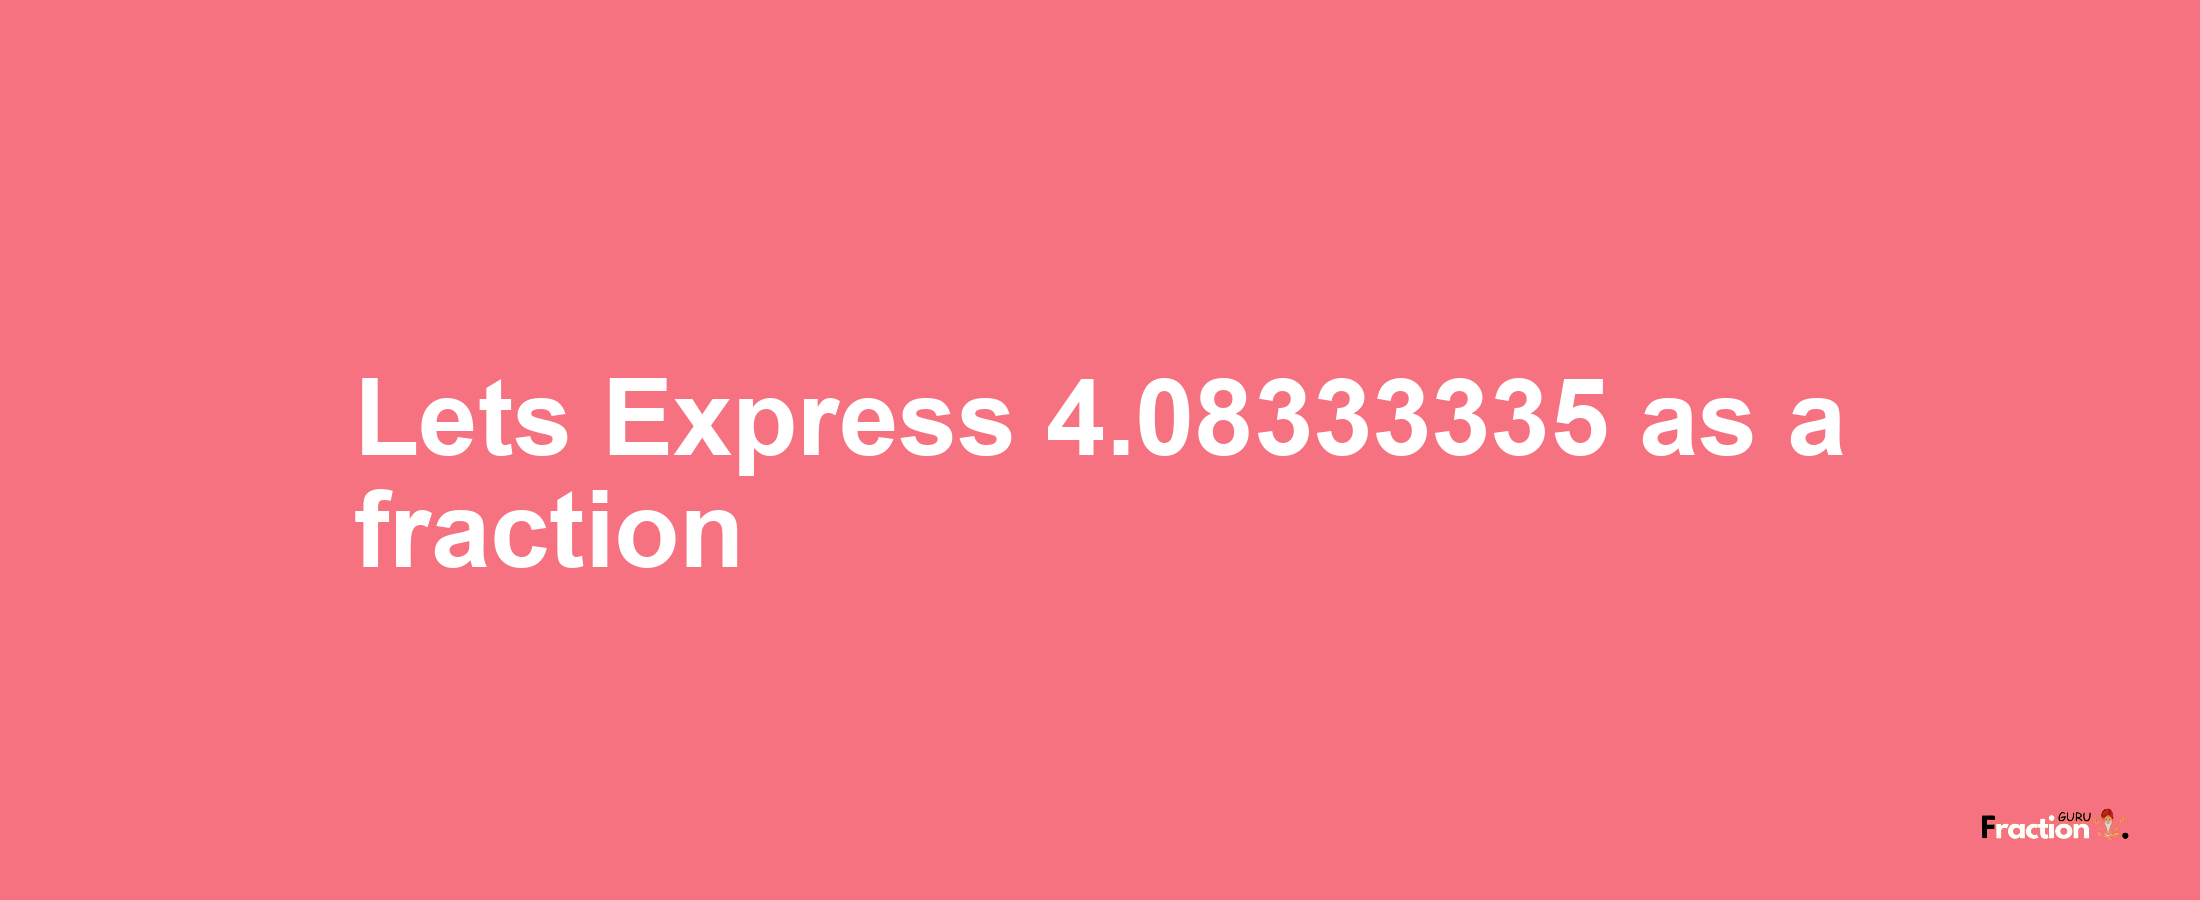 Lets Express 4.08333335 as afraction